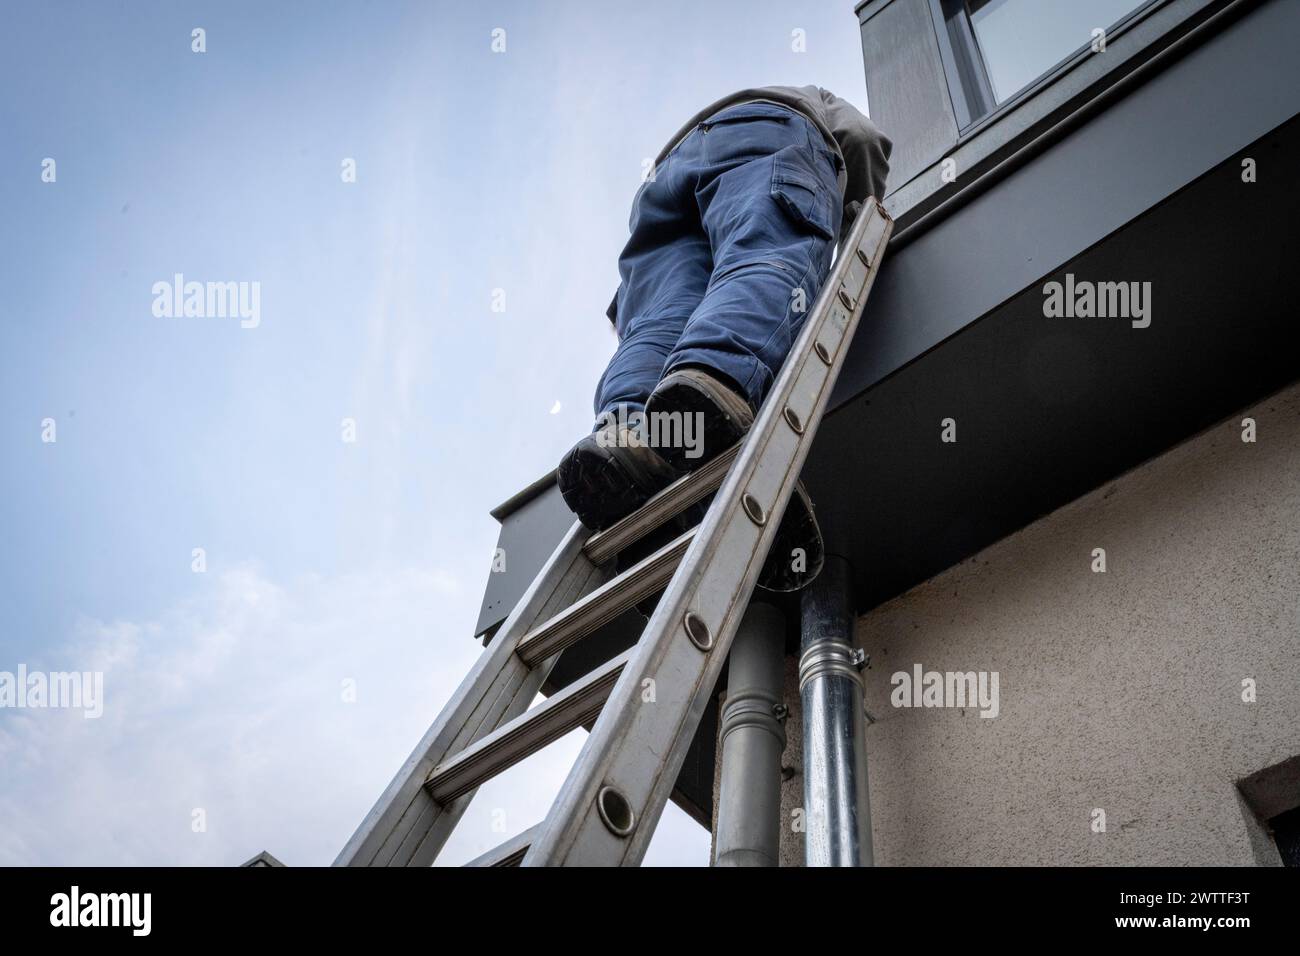 Man climbing a ladder against a building. Stock Photo